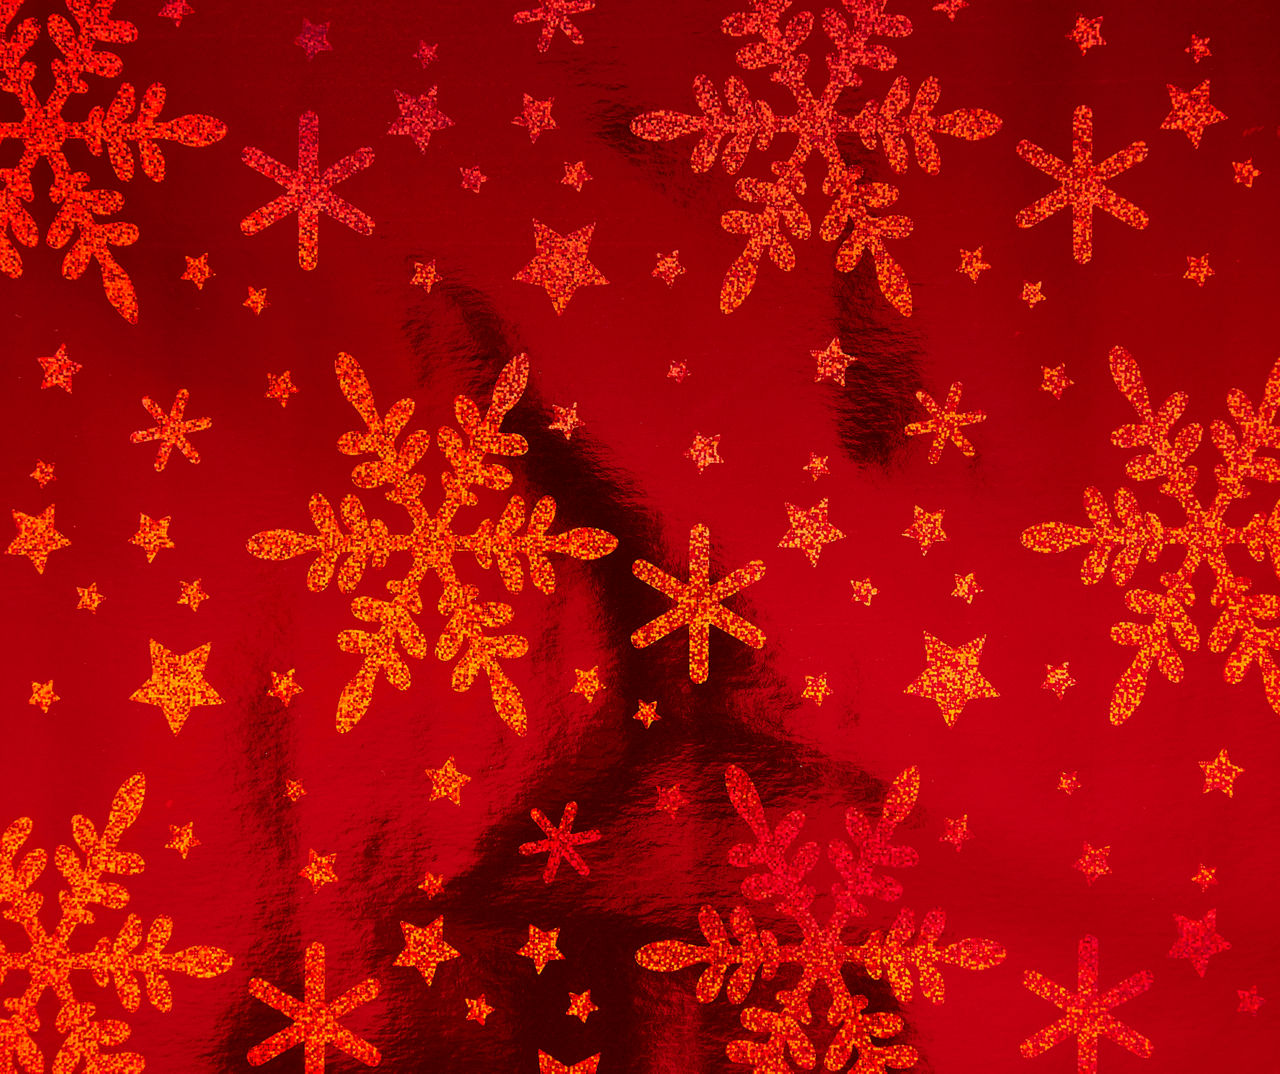 Winter Wonder Lane Red, Silver & Gold Snowflake Prismatic Wrapping Paper  Roll, (25 sq. ft.)